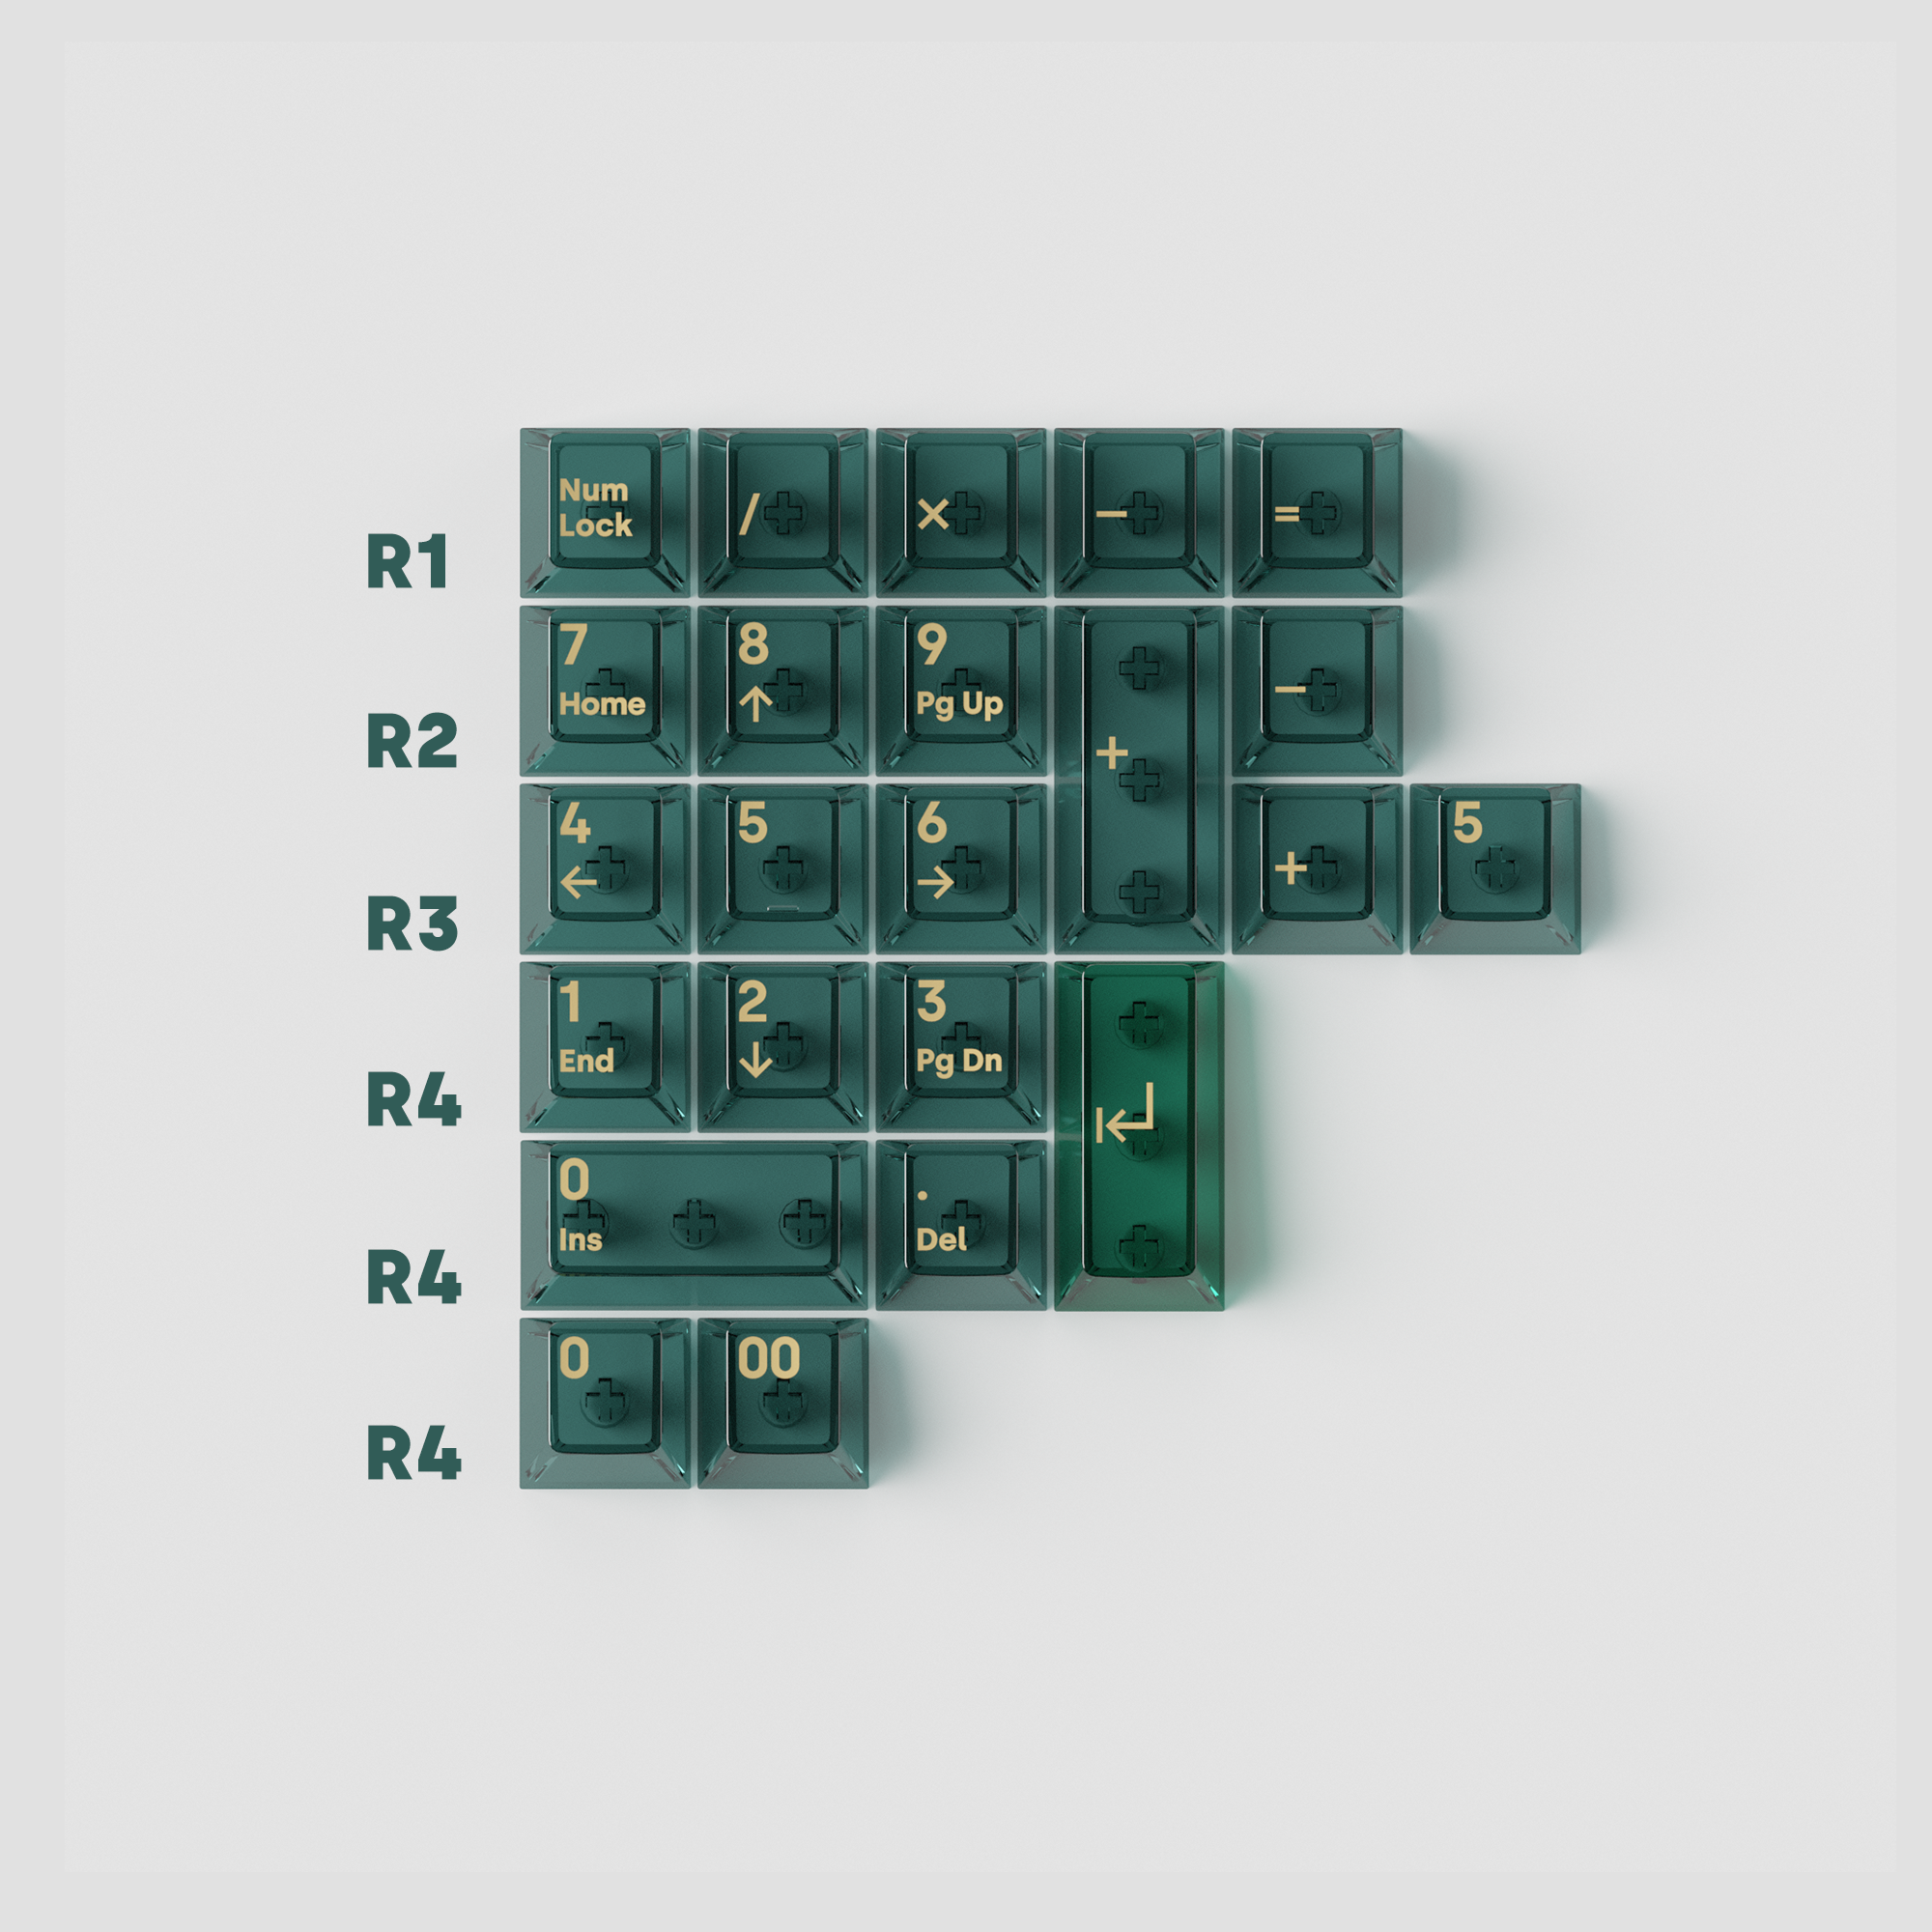 Air-Mallche Keycaps Group-Buy